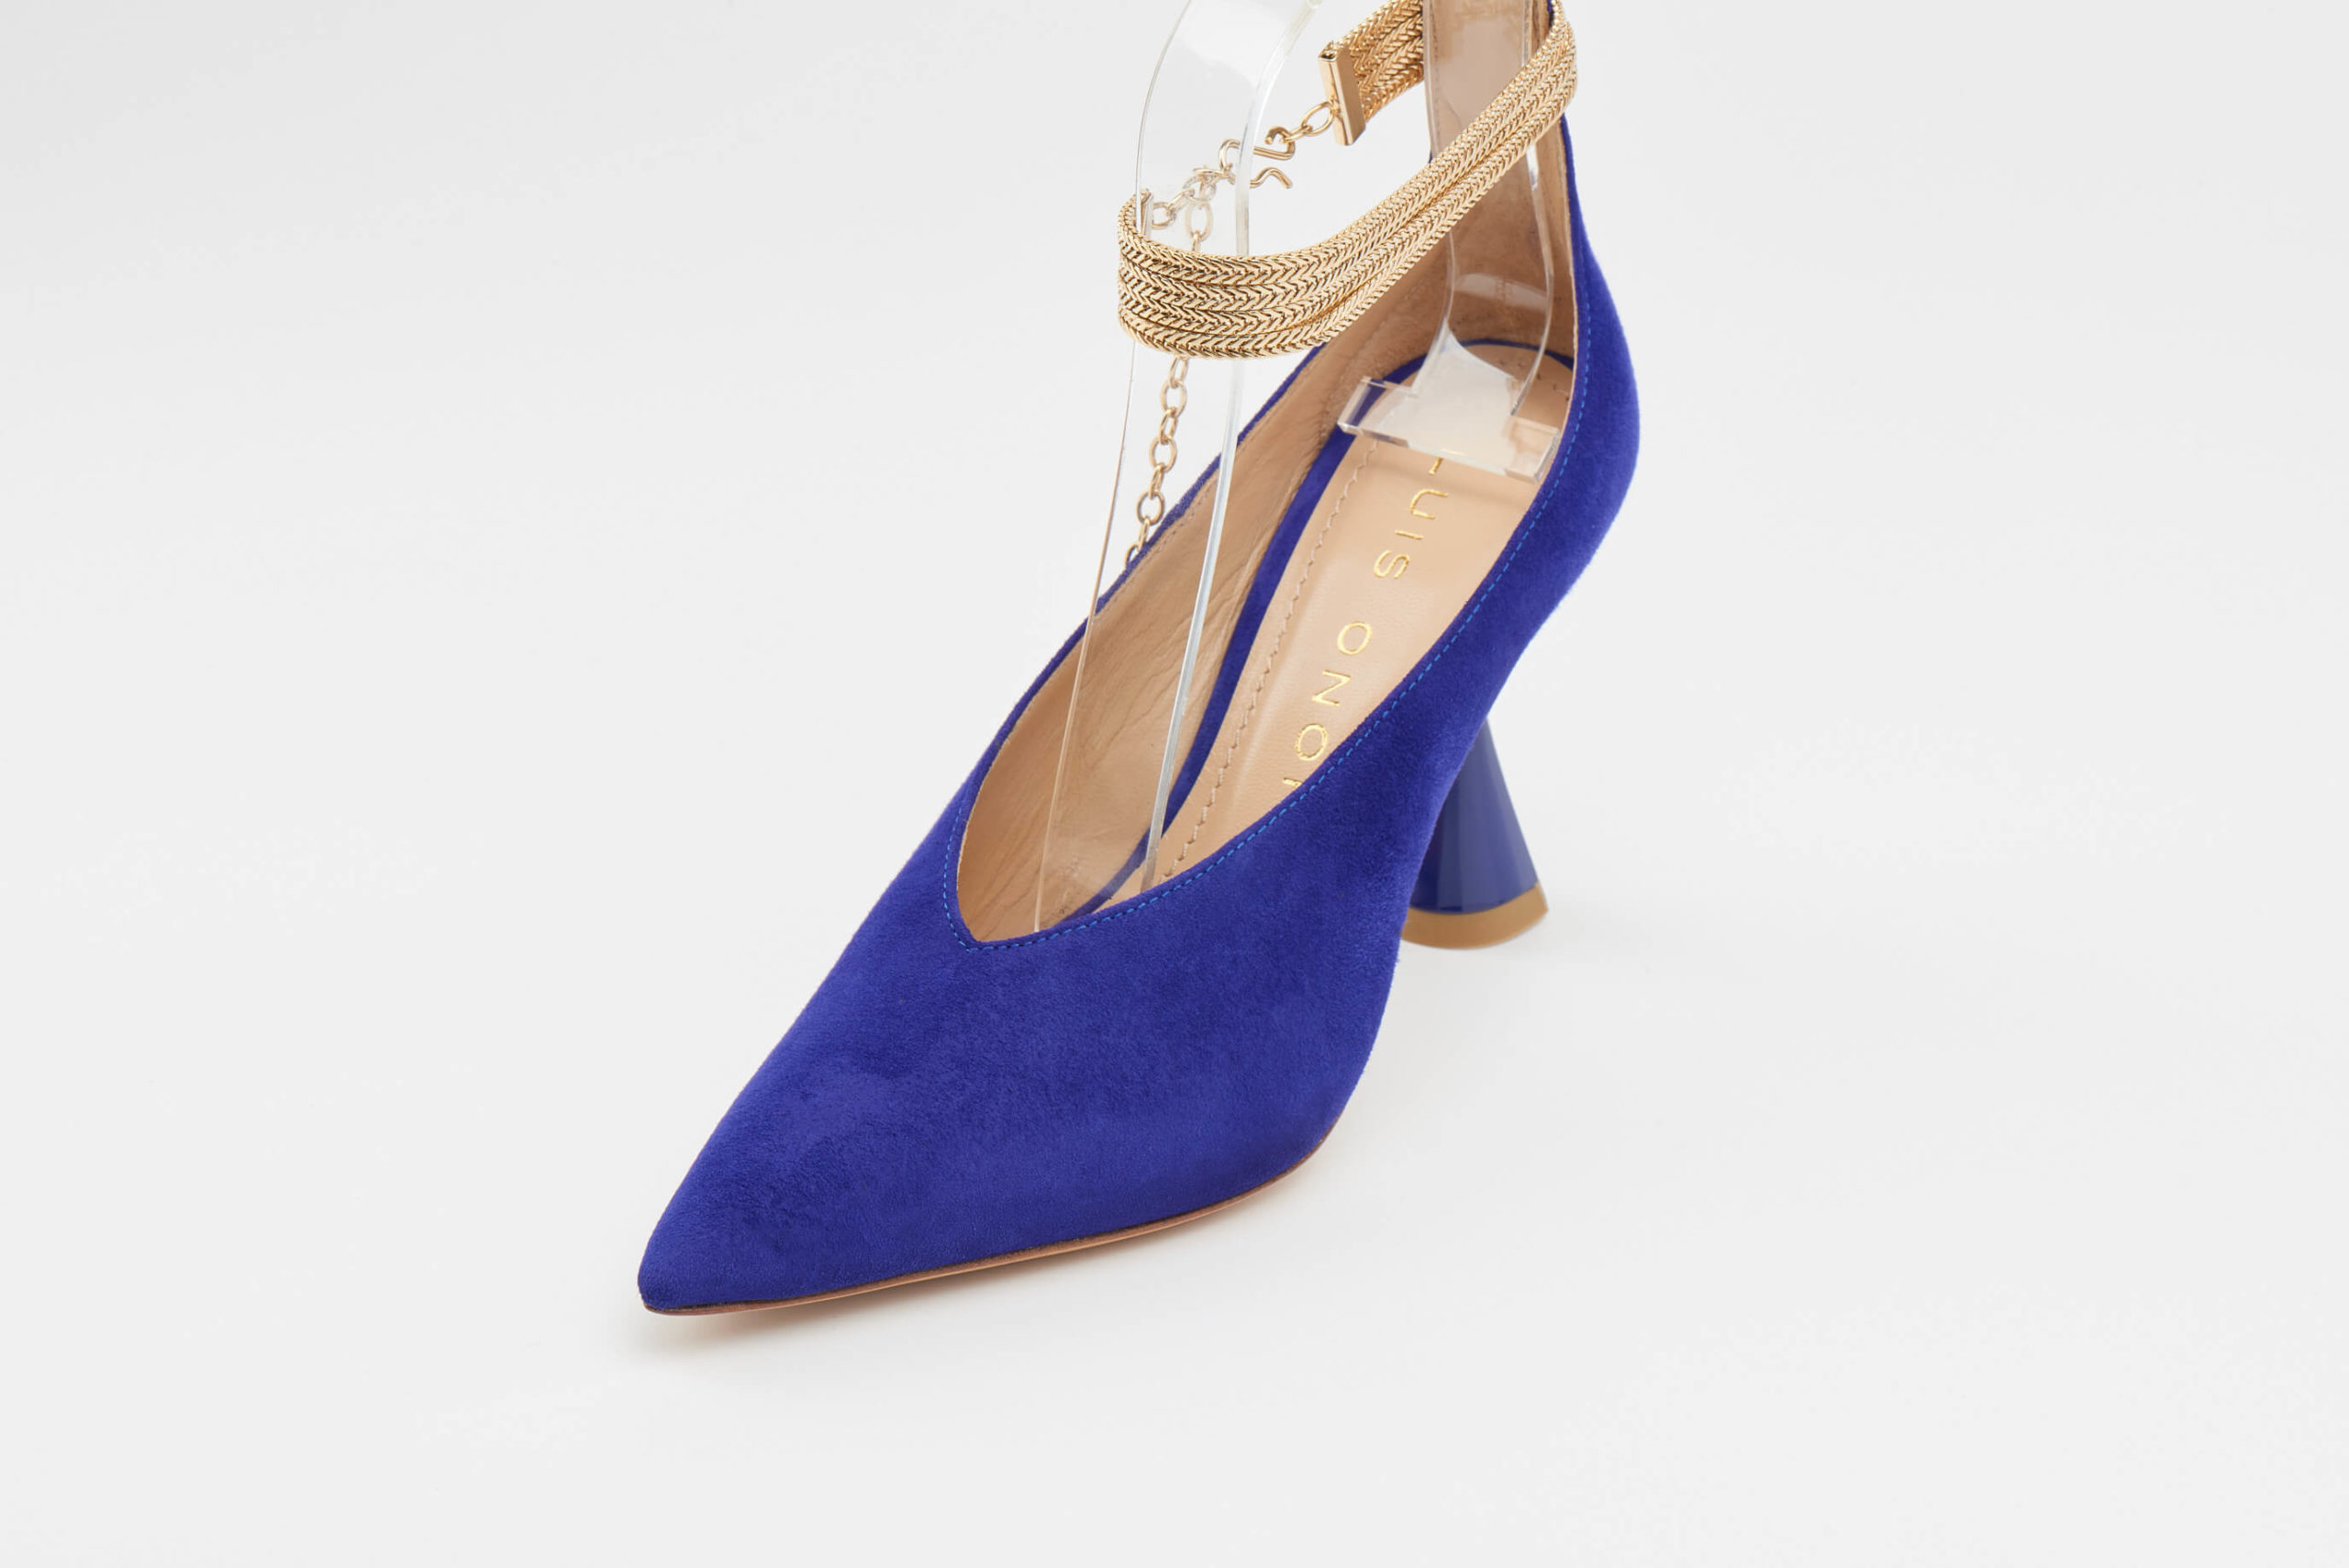 Luis Onofre Portuguese Shoes FW22 – 5275_02 – Palazzo Blue-7